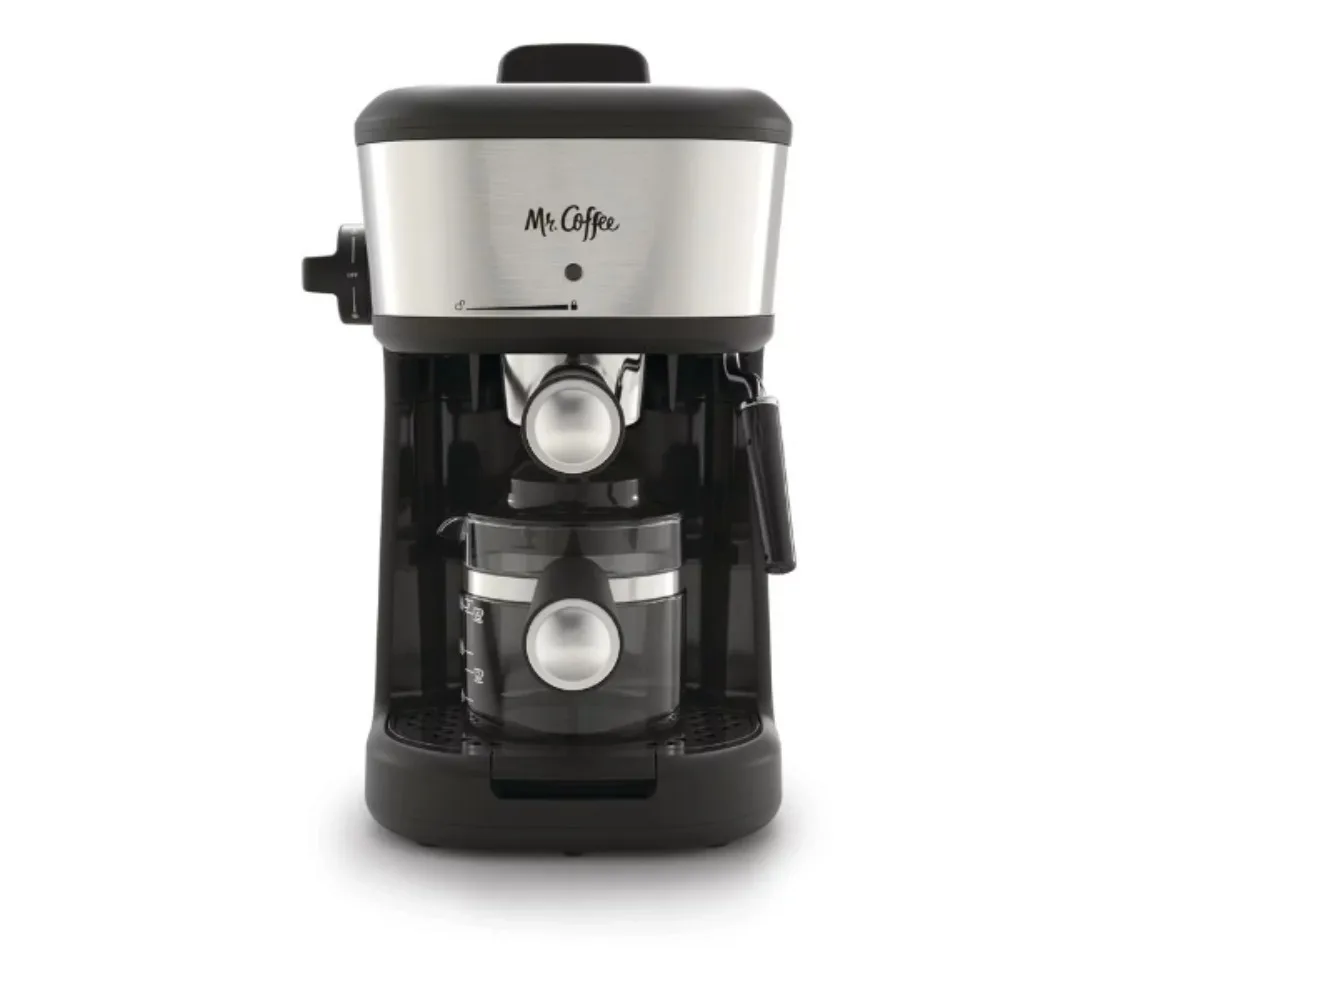 https://ae01.alicdn.com/kf/S58c0744ab4374a80ac432ff67aff18d2c/Mr-Coffee-4-Shot-Steam-Espresso-Cappuccino-Latte-Maker-Coffee-Makers-Powerful-Steam-Brewing-Perfect-for.jpg